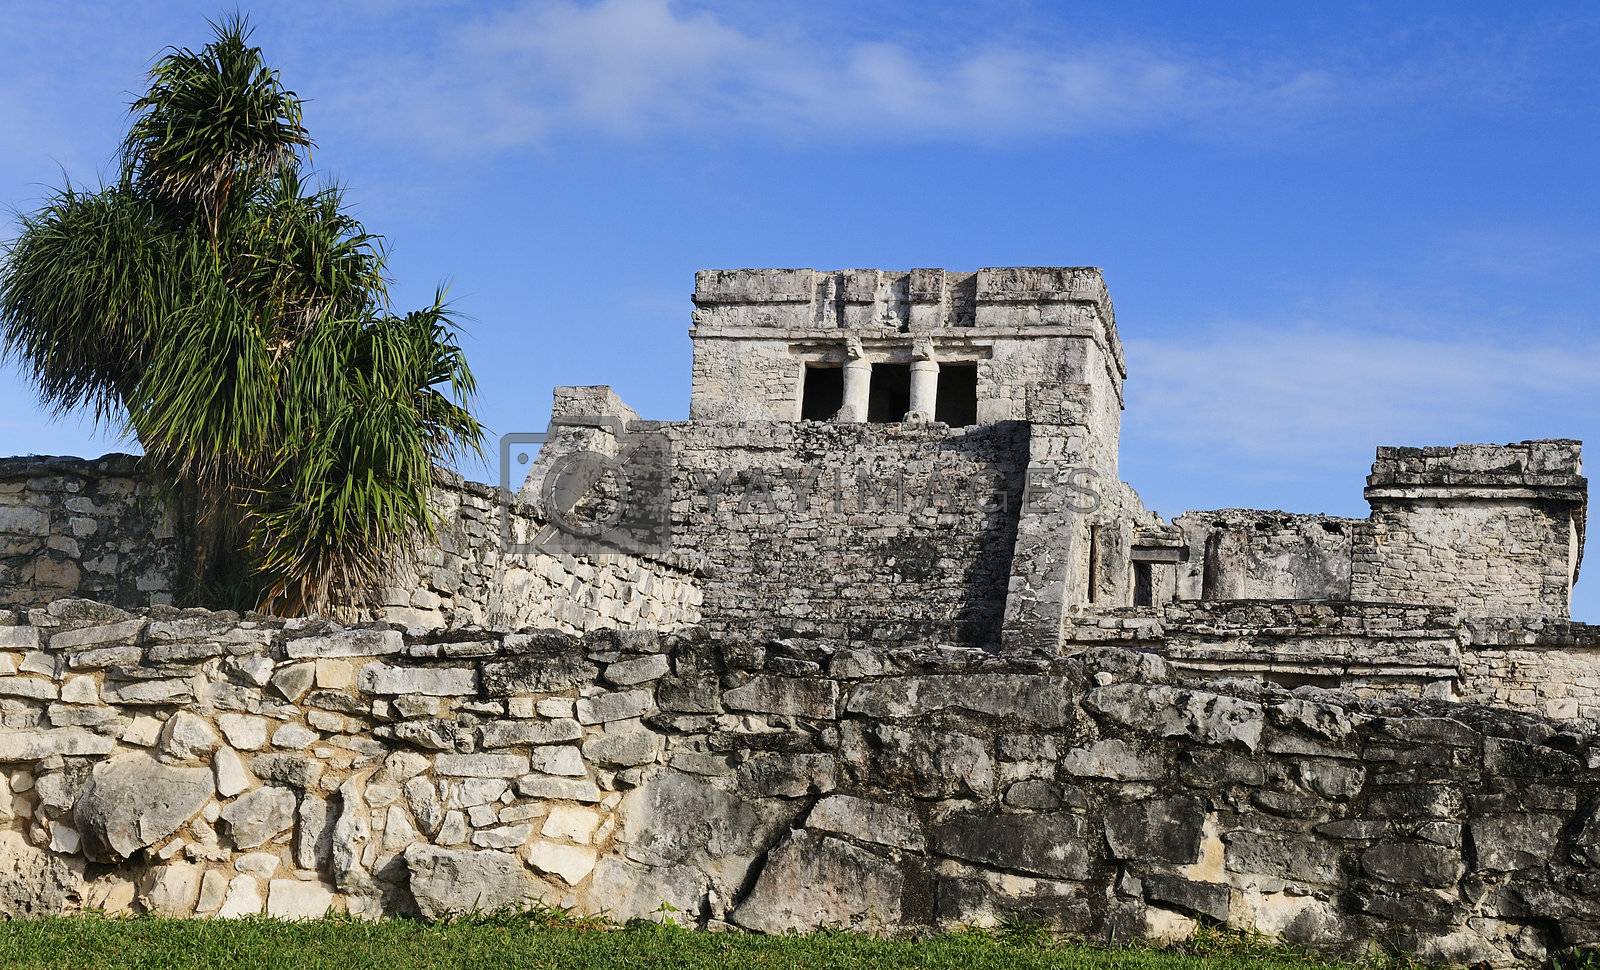 Royalty free image of Mayan ruins of Tulum Mexico by ventdusud